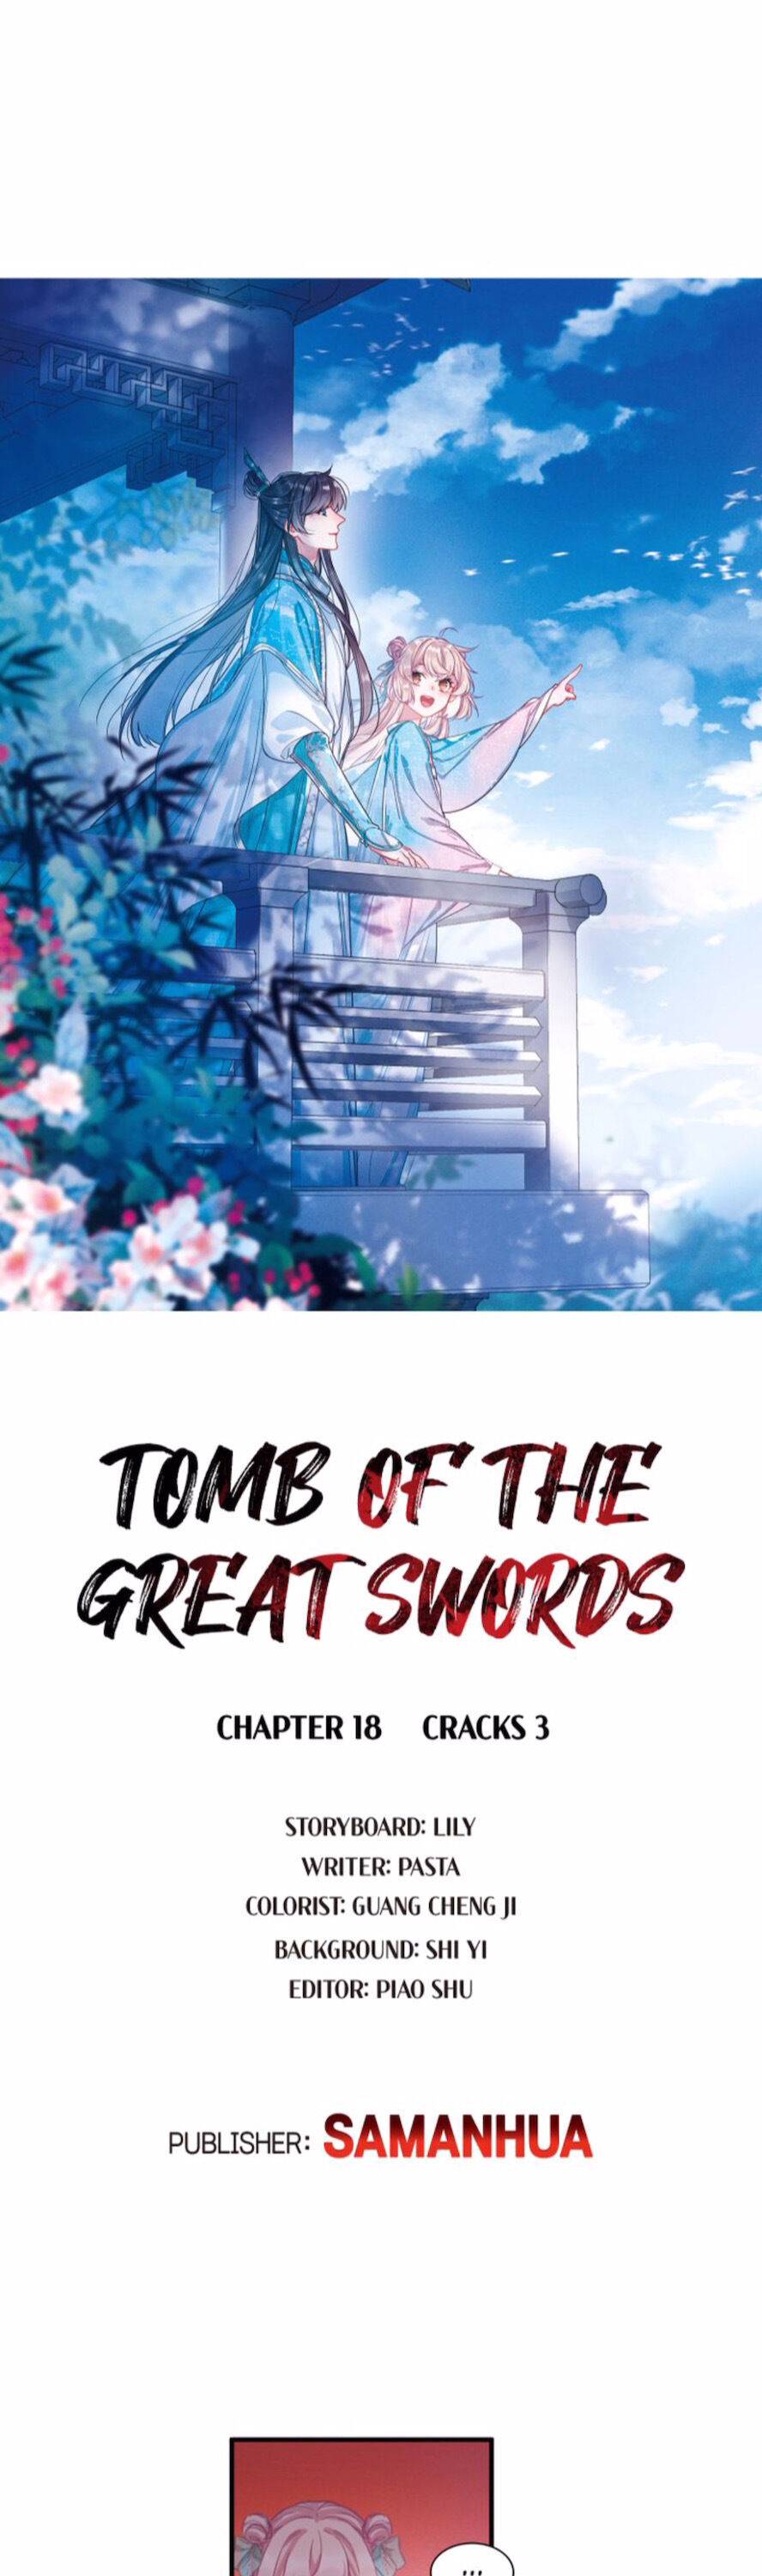 Tomb of the Great Swords Chapter 18